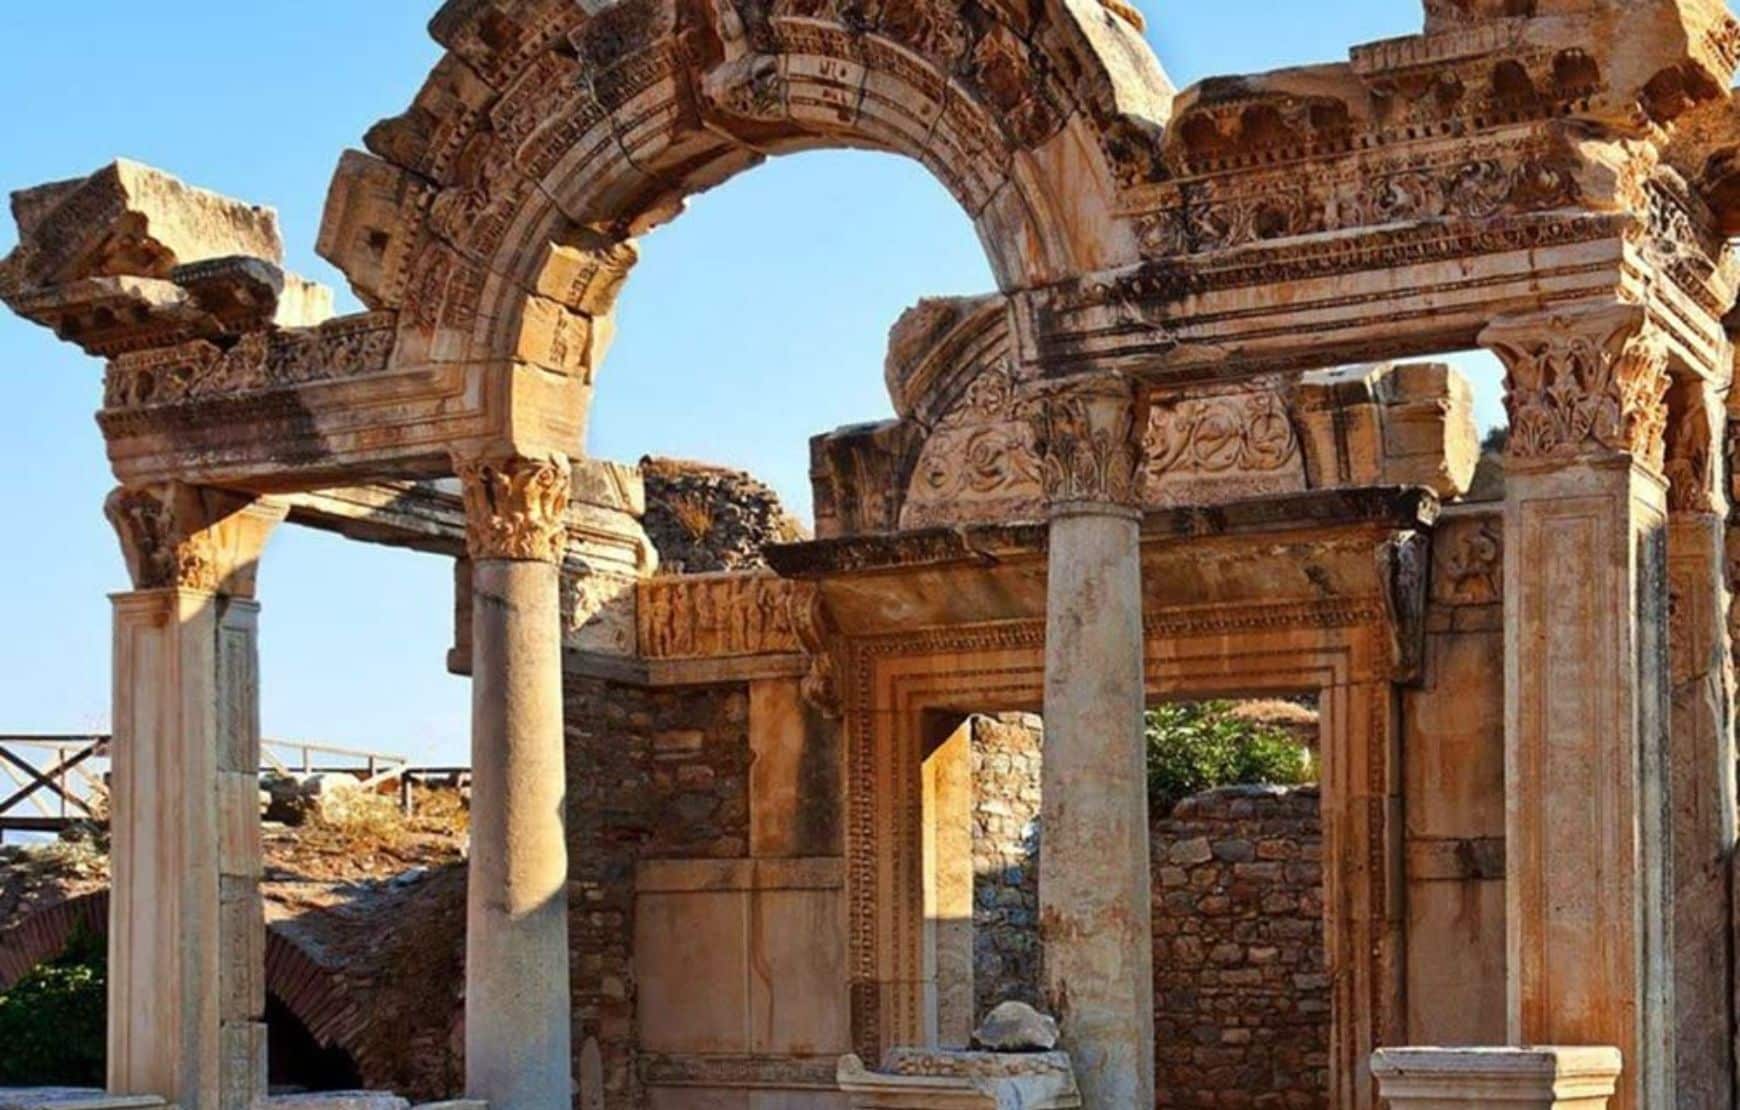 You will visit Hadrian's Gate during your Ephesus Ancient City Tour